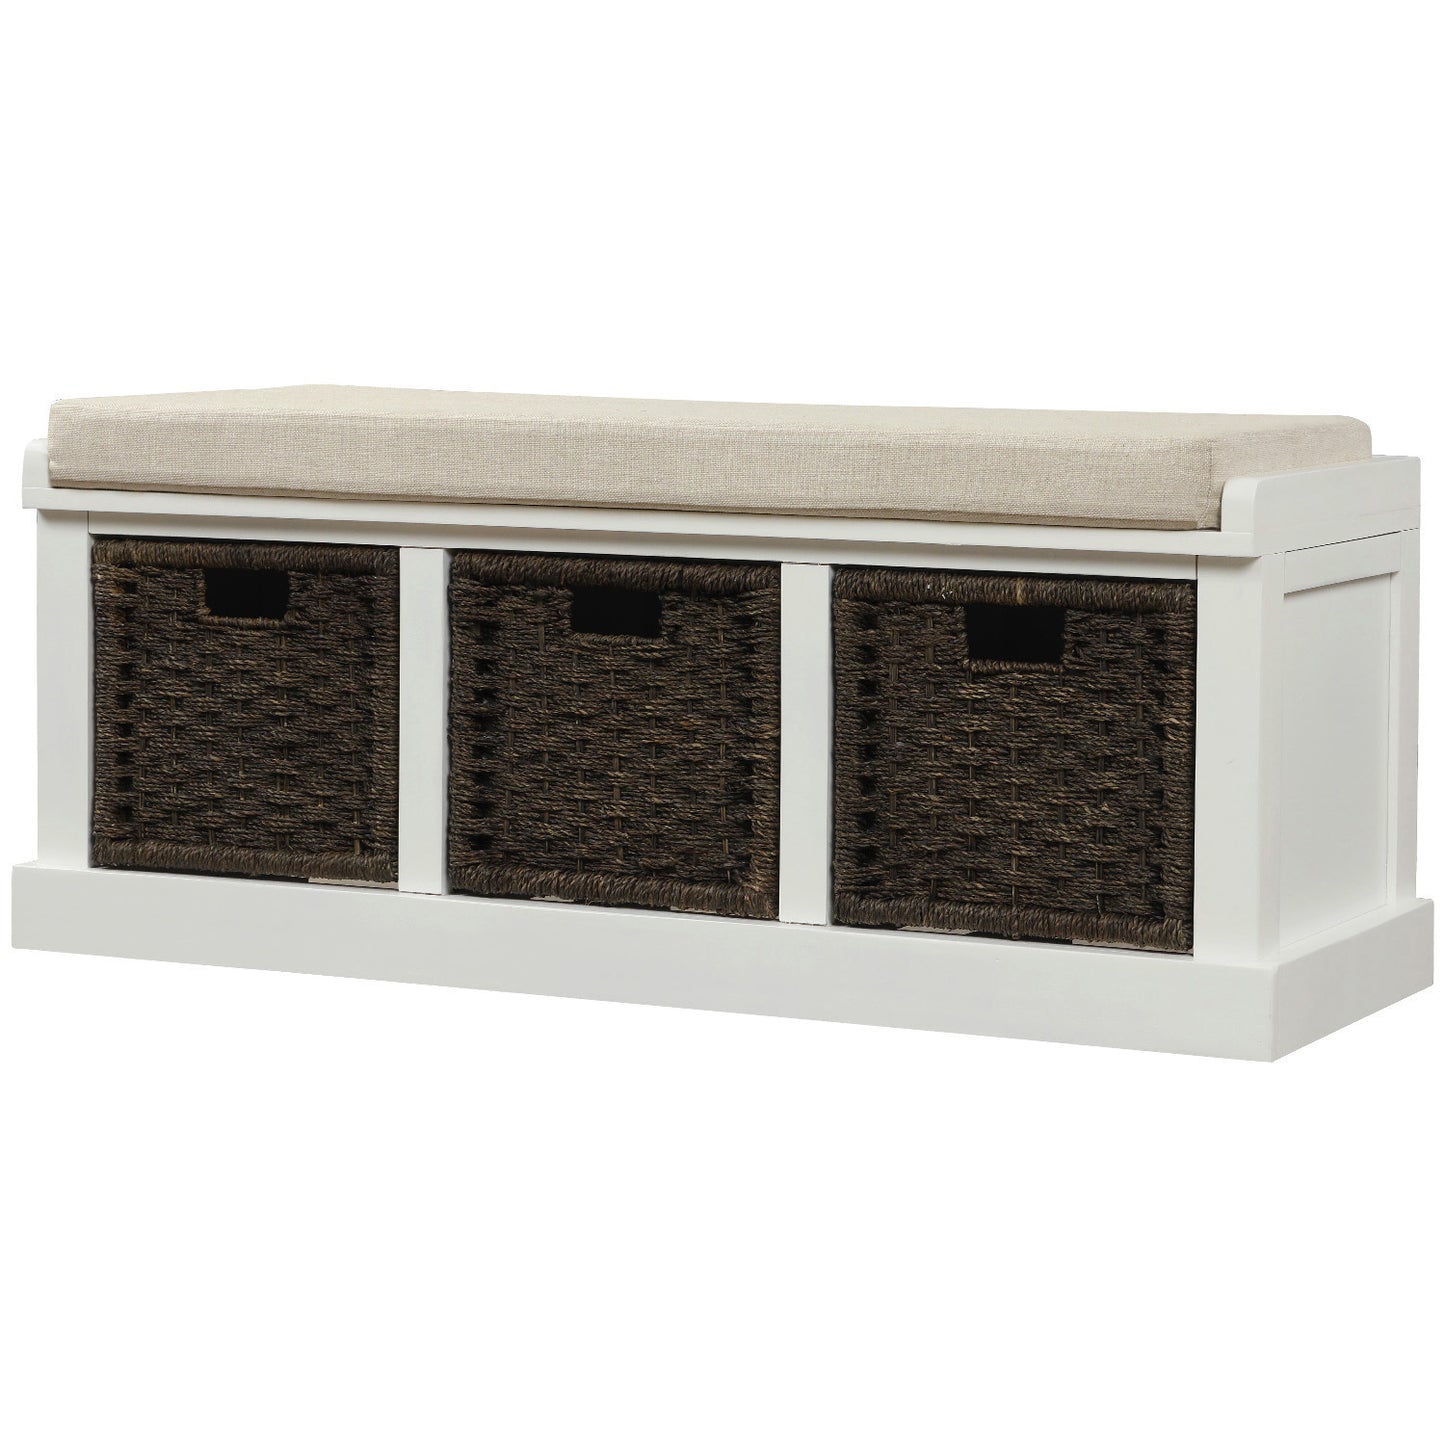 TREXM Rustic Storage Bench with 3 Removable Classic Rattan Baskets - White